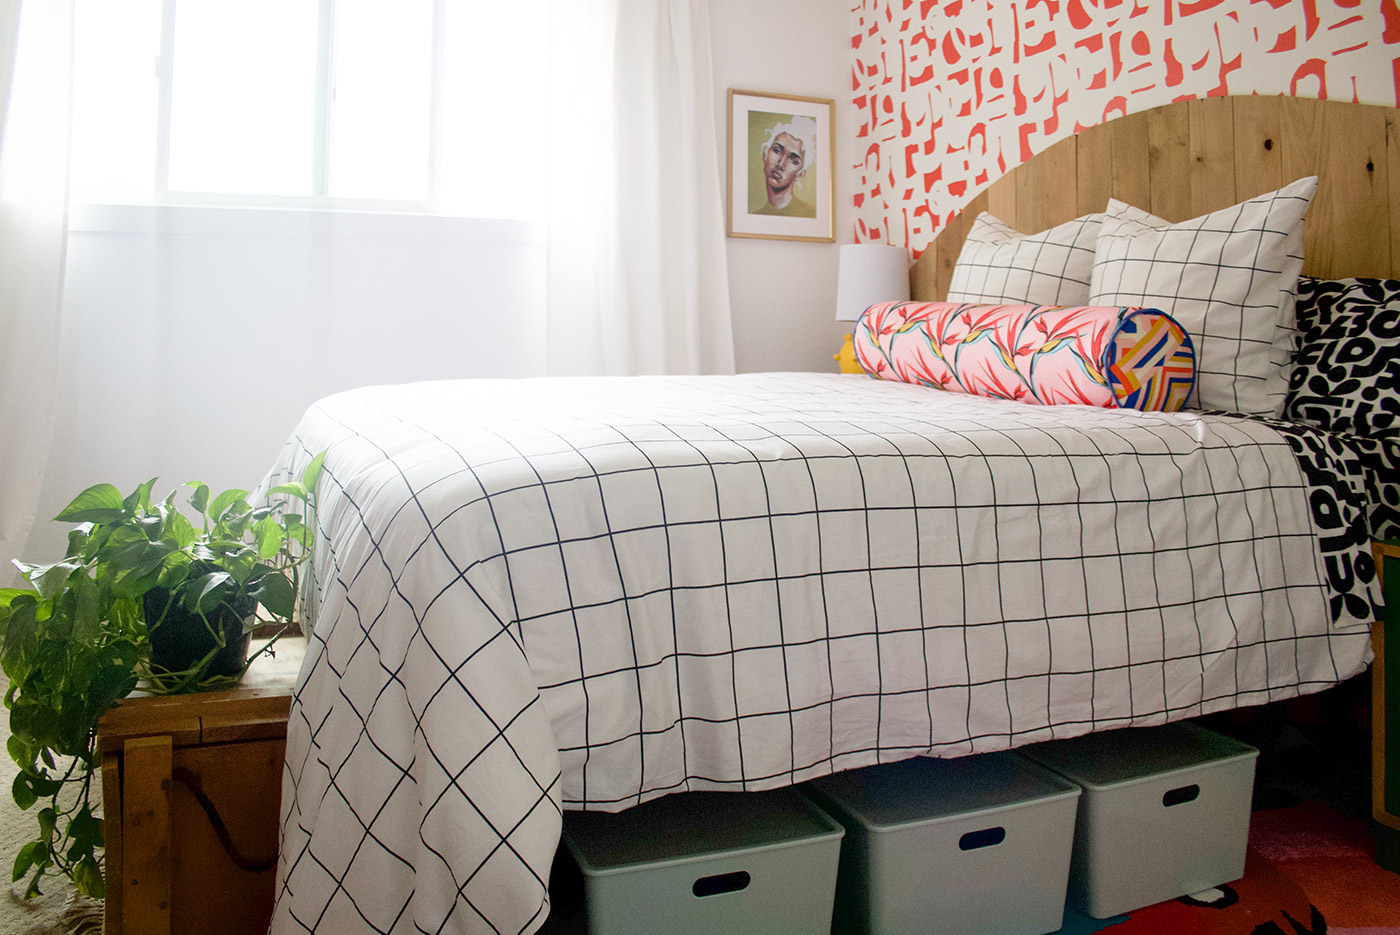 How to mix and match patterns and colors in the bedroom with spoonflower